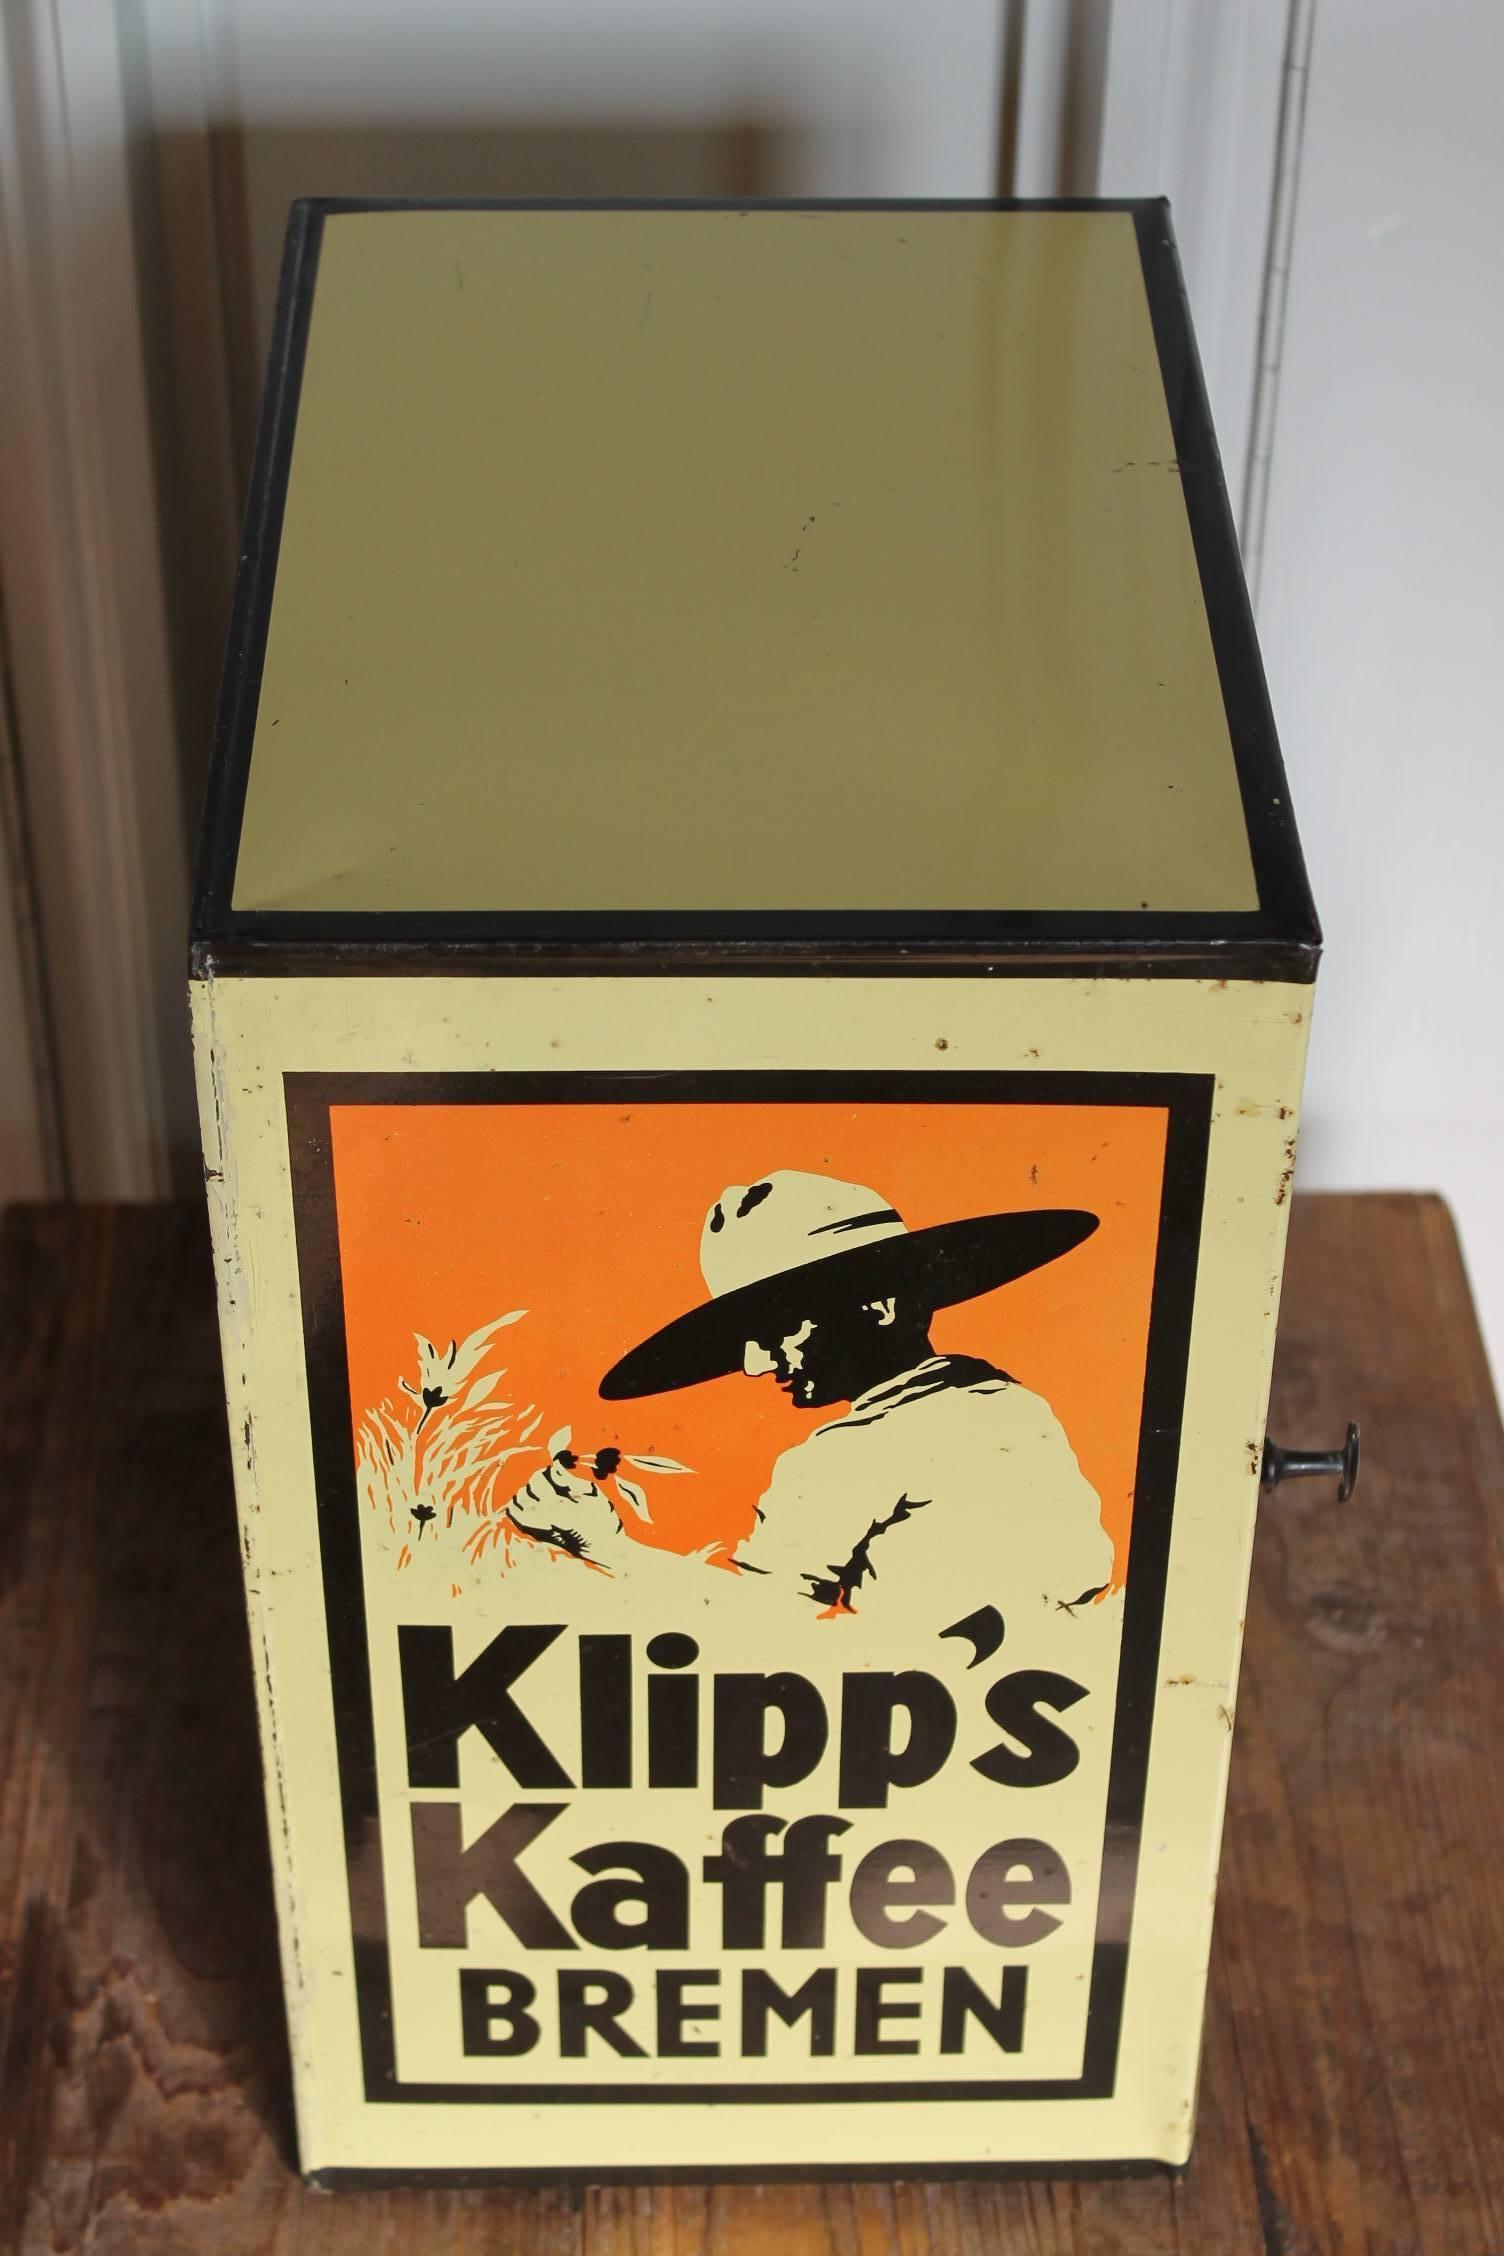 Vintage coffee shop display for Klipps - Klipp - Kaffee Bremen, Germany.
This counter roaster tin box with door was made between 1930 and 1950.
Can closet - cupboard was made for the coffee vendor - grocer to use as a counter display for the